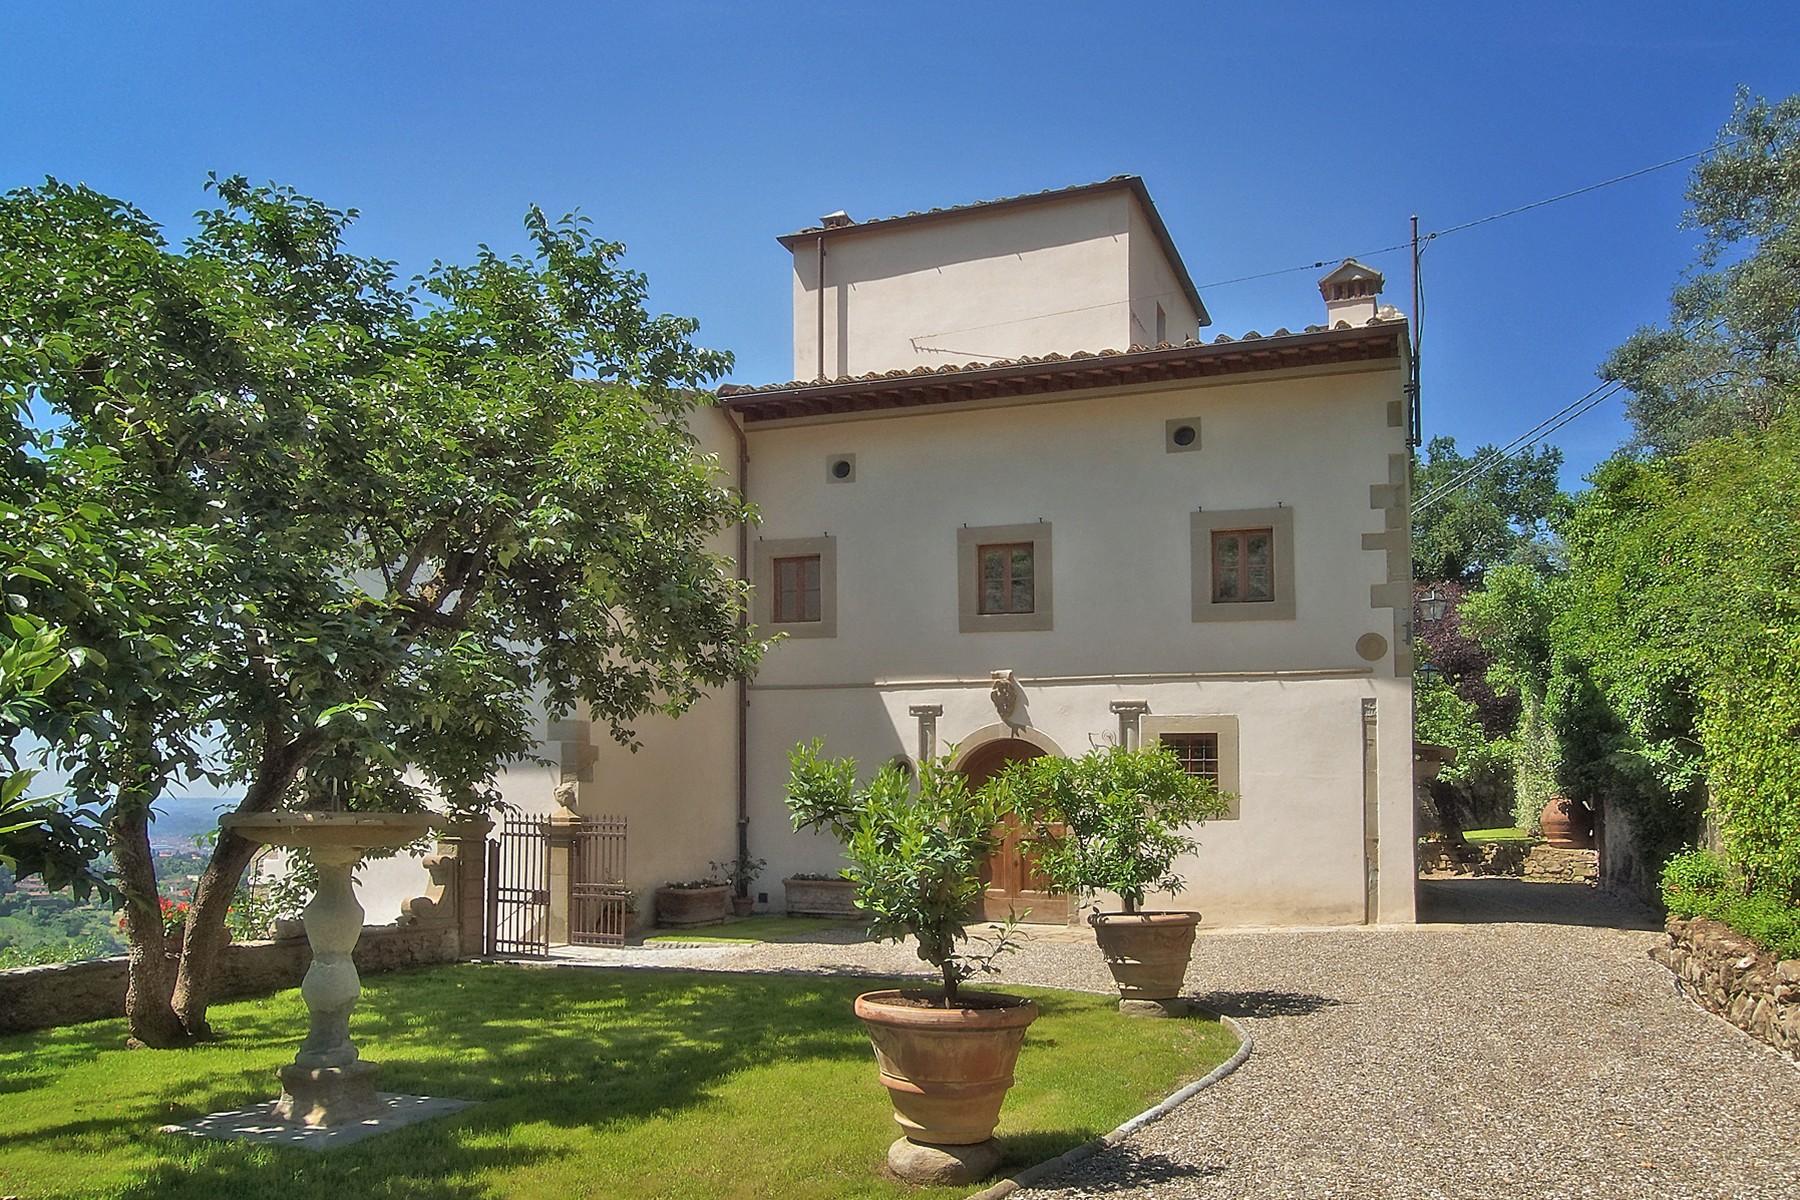 Marvellous villa with pool on the hills of Florence - 4